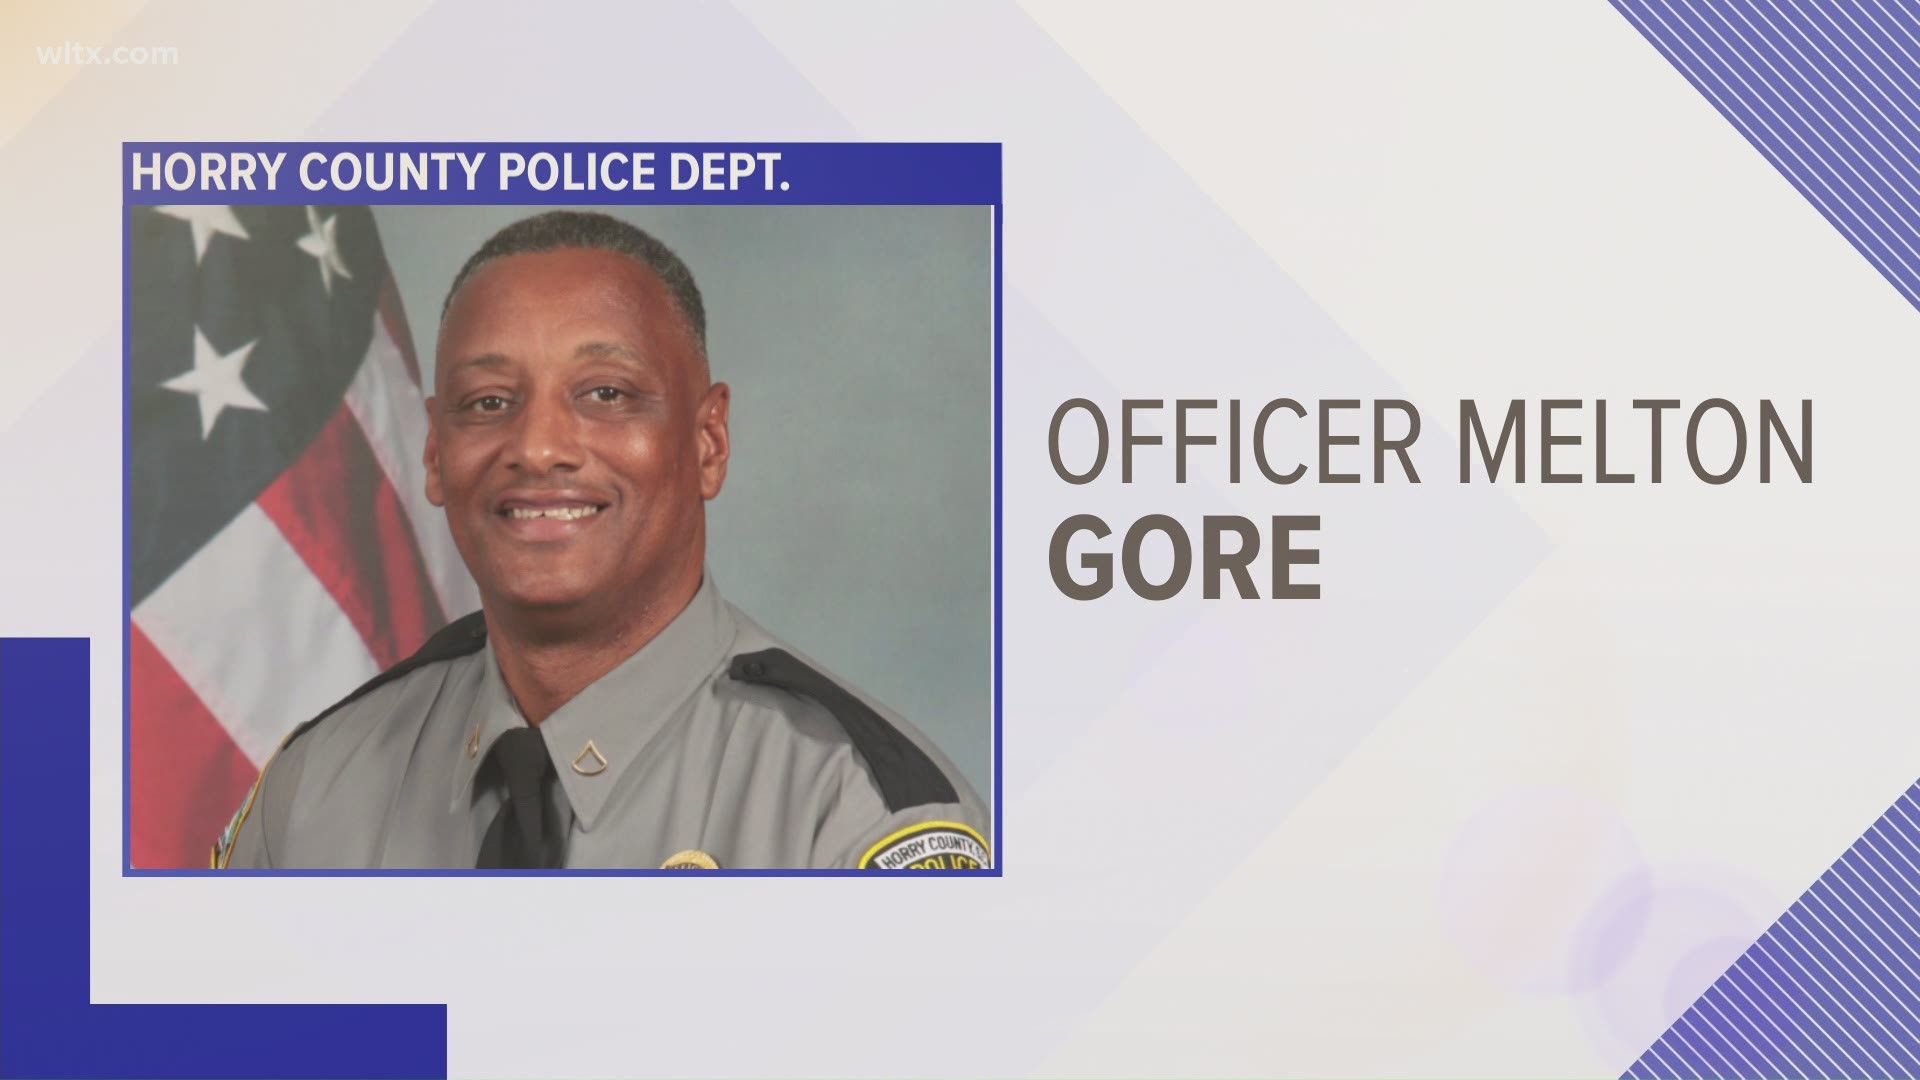 Officer Melton “Fox” Gore was struck and killed Tuesday while removing debris from the roadway.